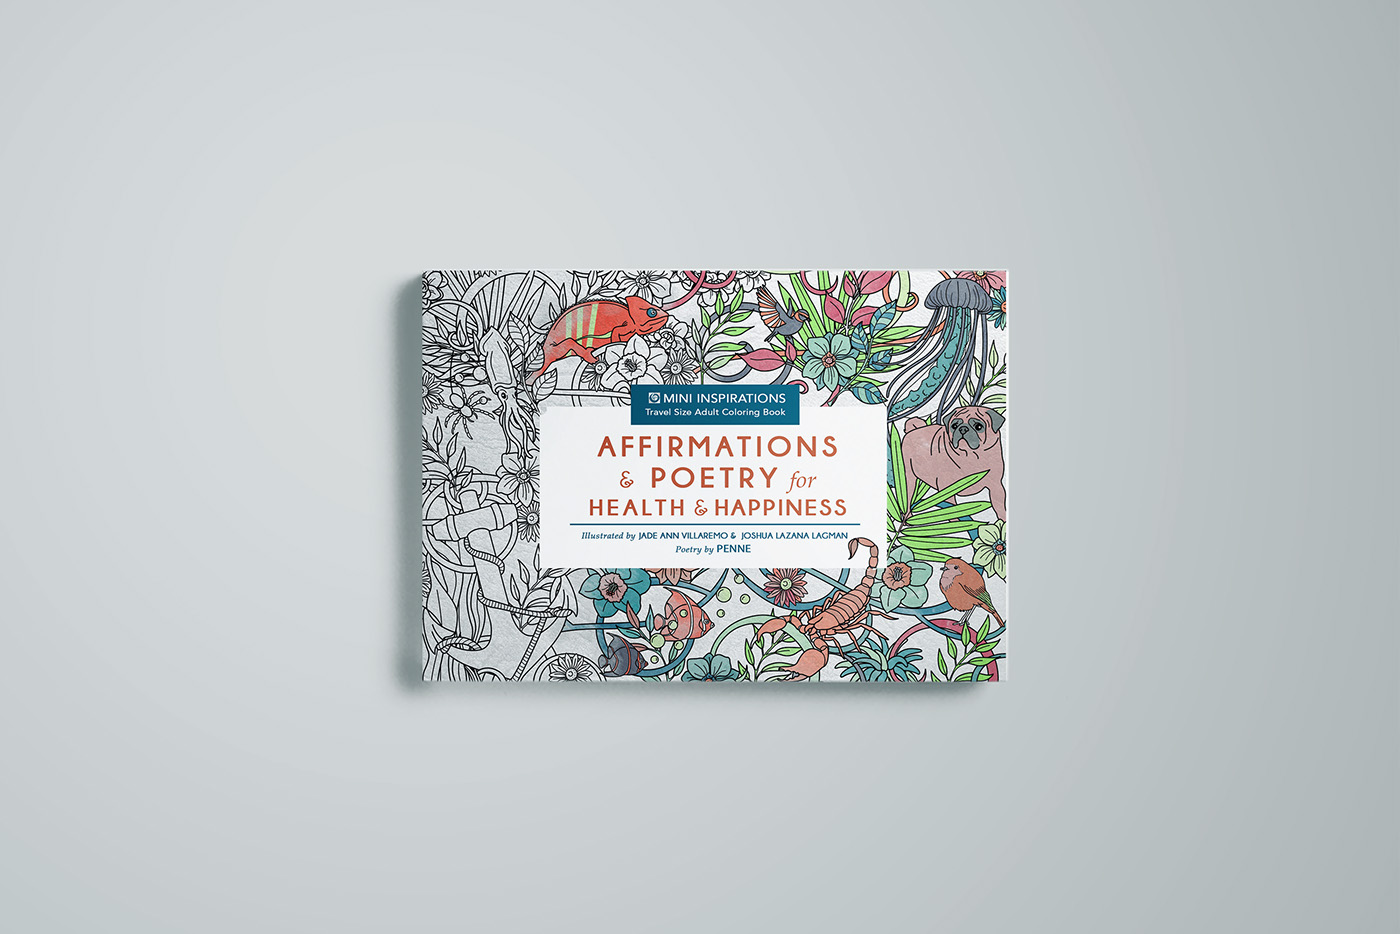 coloring book book cover ILLUSTRATION  book Nature illustrations animals plants